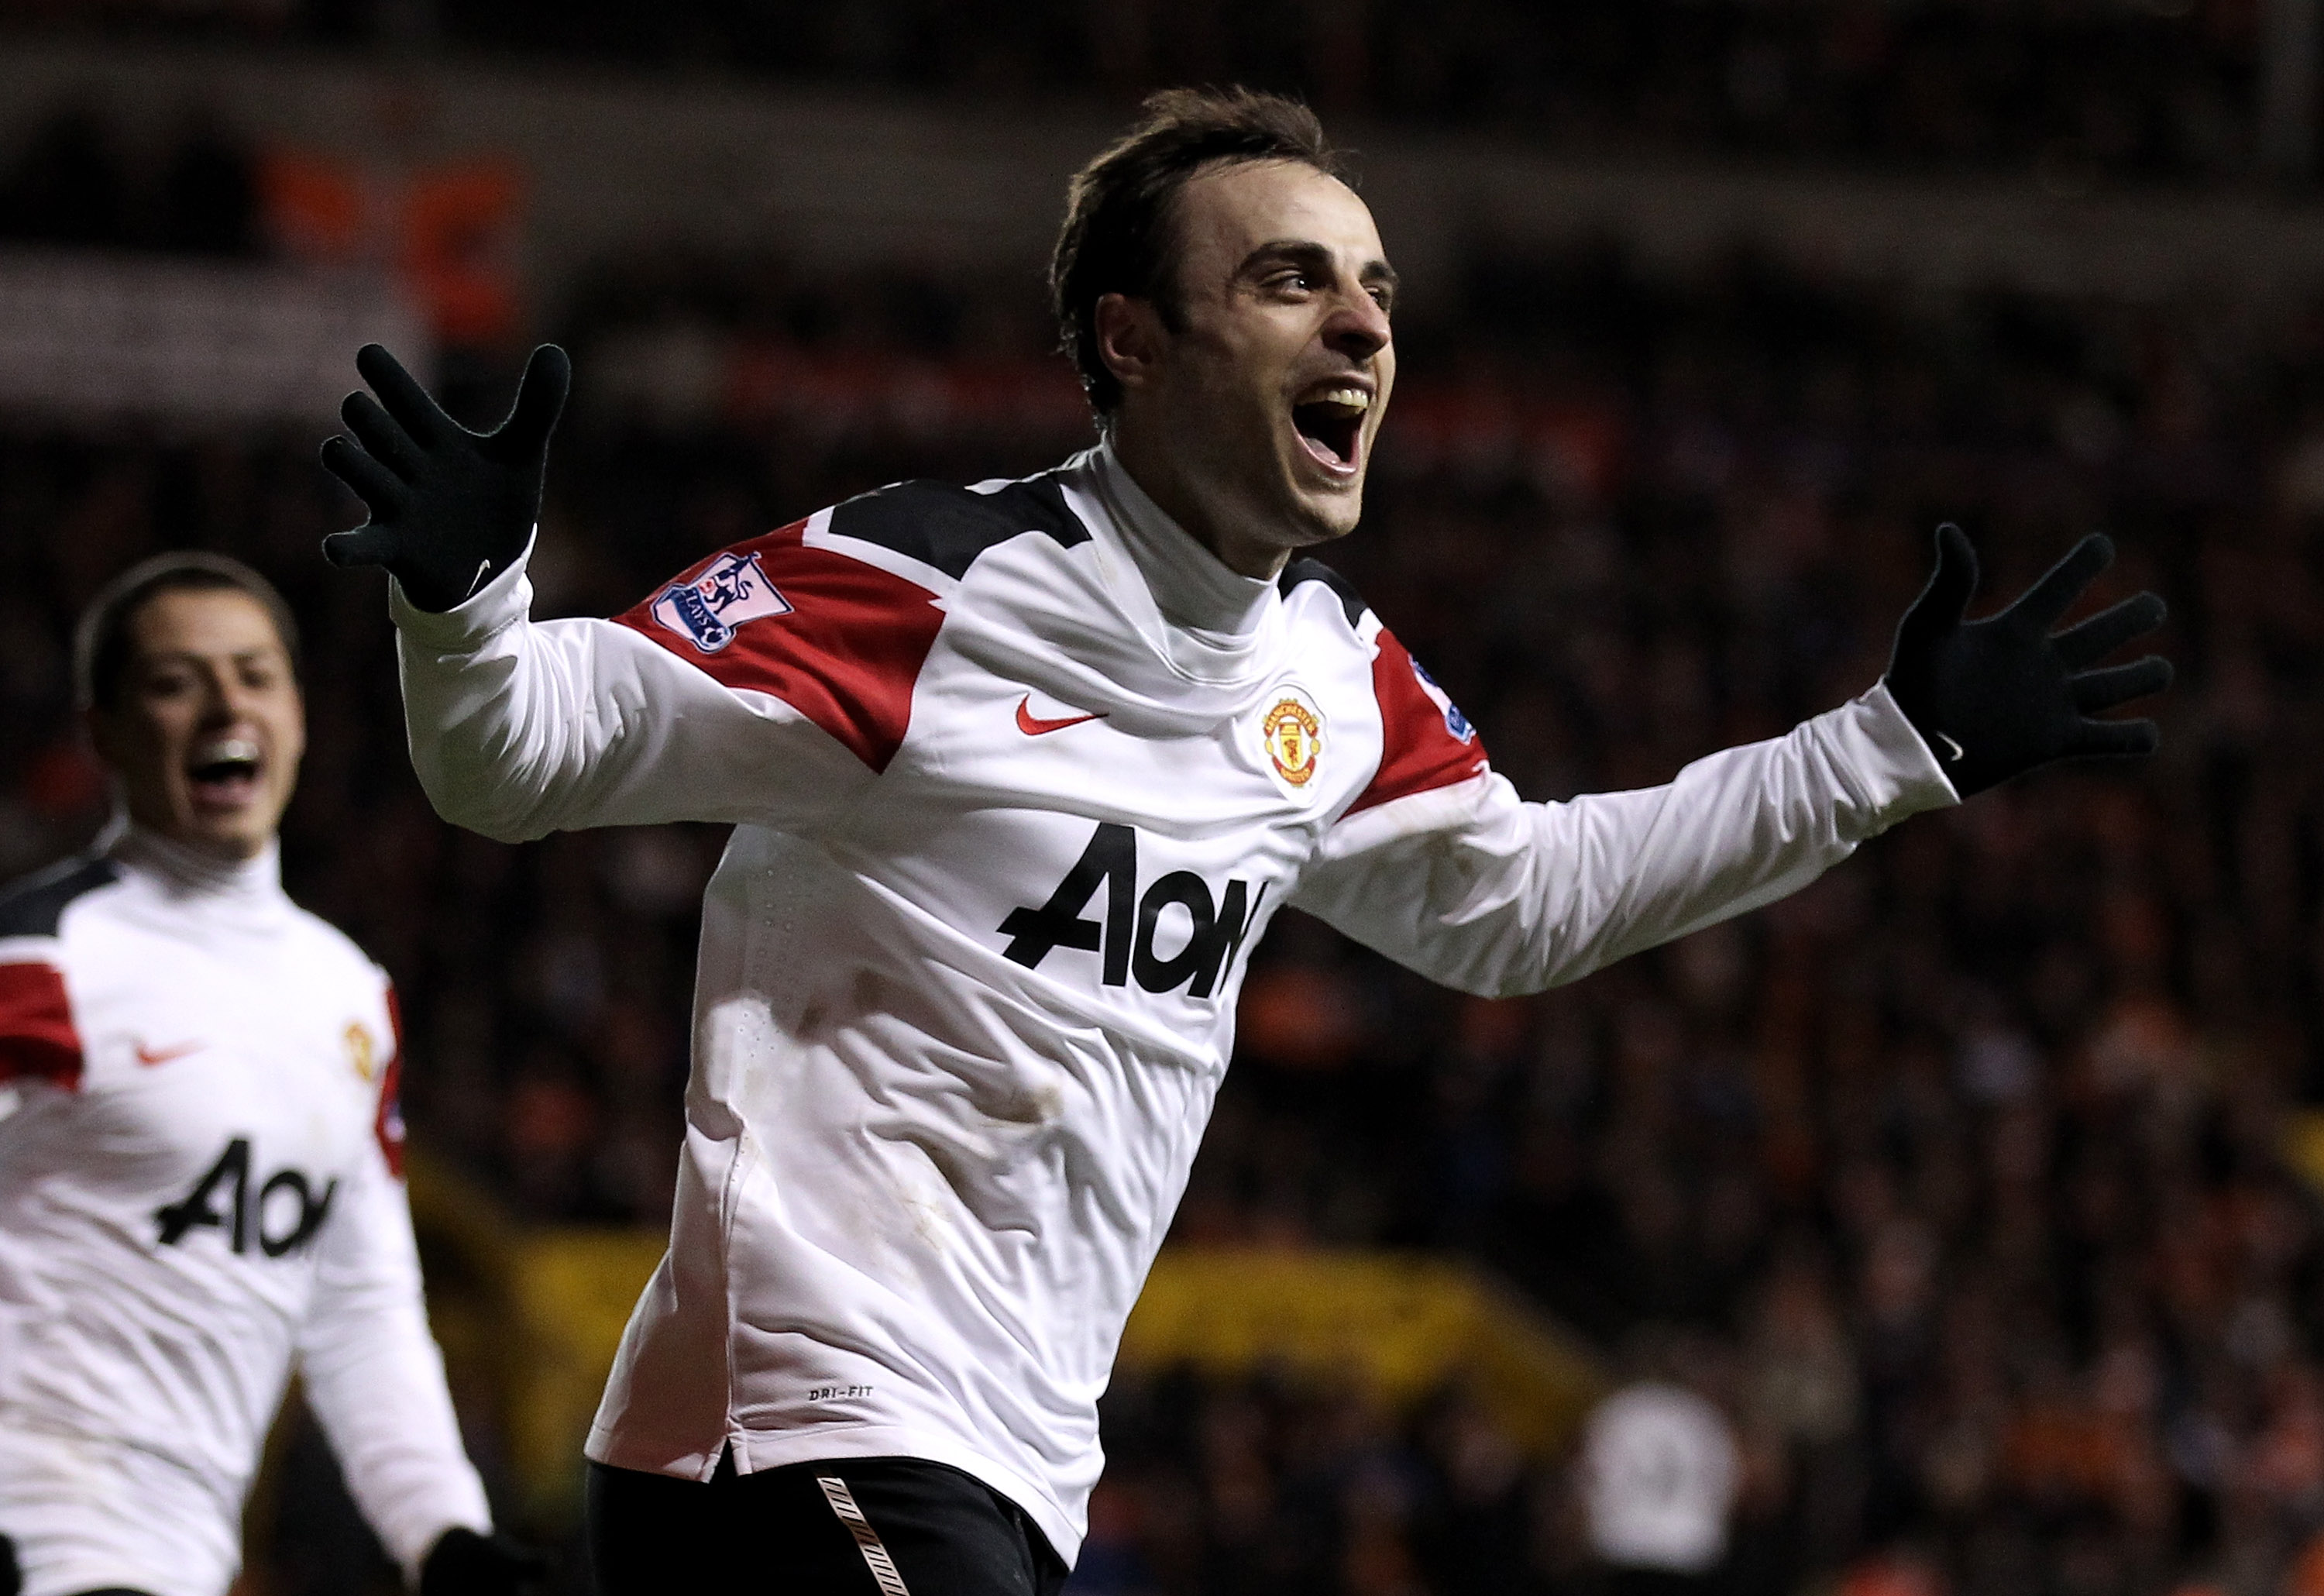 BLACKPOOL, ENGLAND - JANUARY 25:   Dimitar Berbatov of Manchester United celebrates scoring his team's third goal during the Barclays Premier League match between Blackpool and Manchester United at Bloomfield Road on January 25, 2011 in Blackpool, England